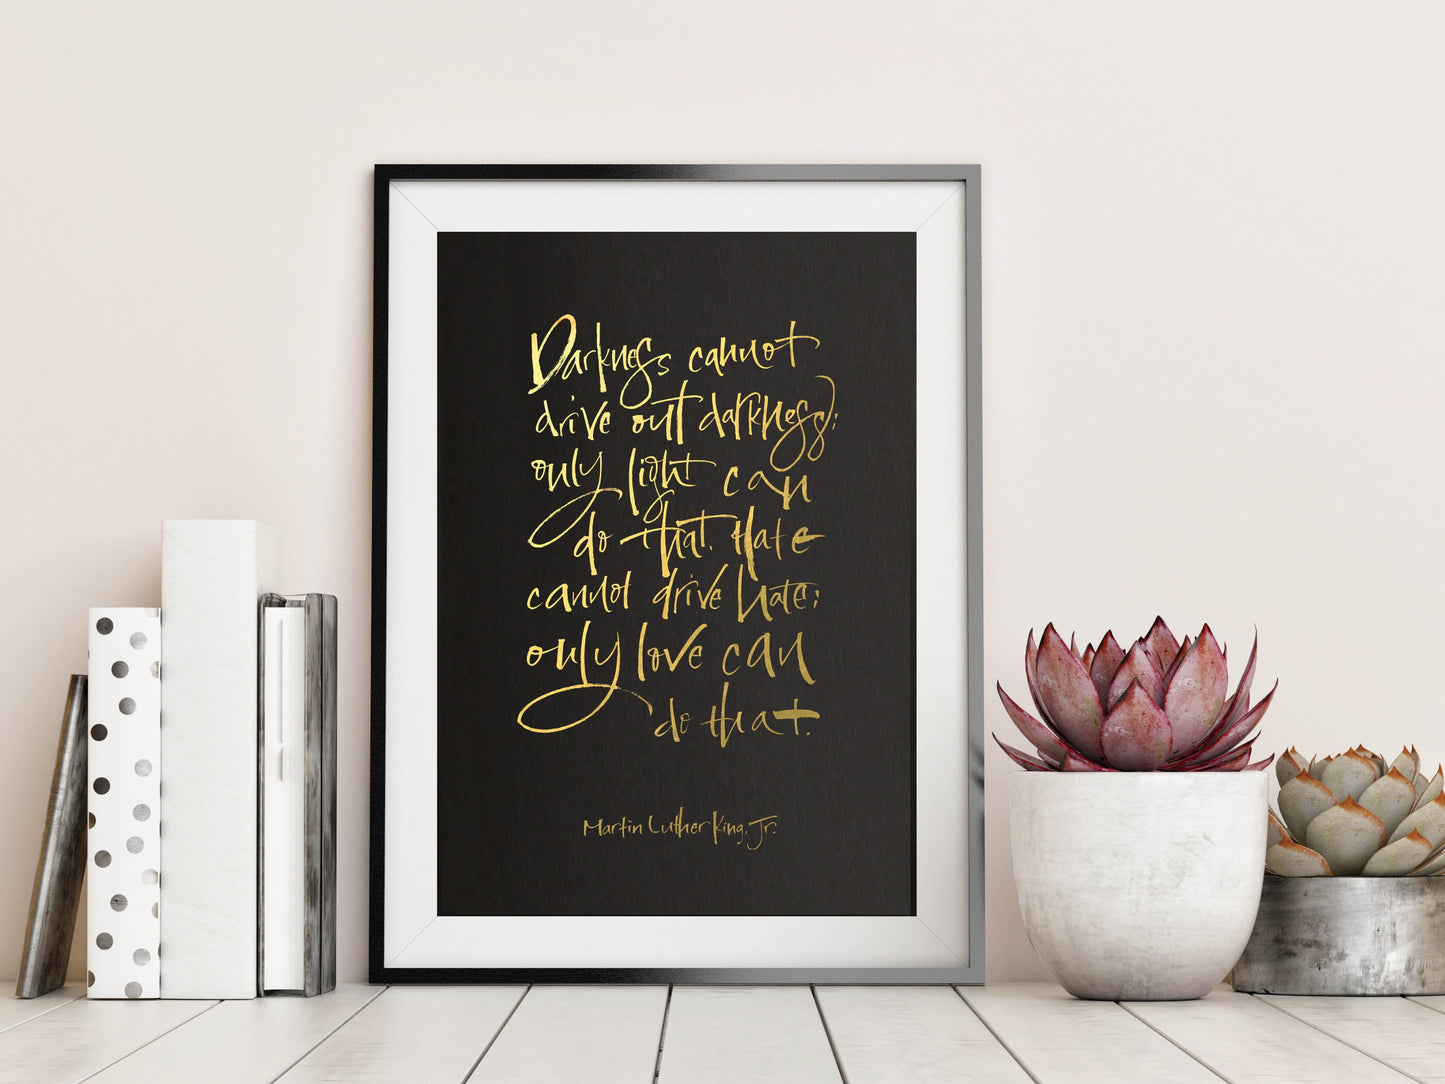 Martin Luther King Print - Inspirational Quote - Motivational poster - darkness cannot drive out darkness - Black Lives Matter - BLM